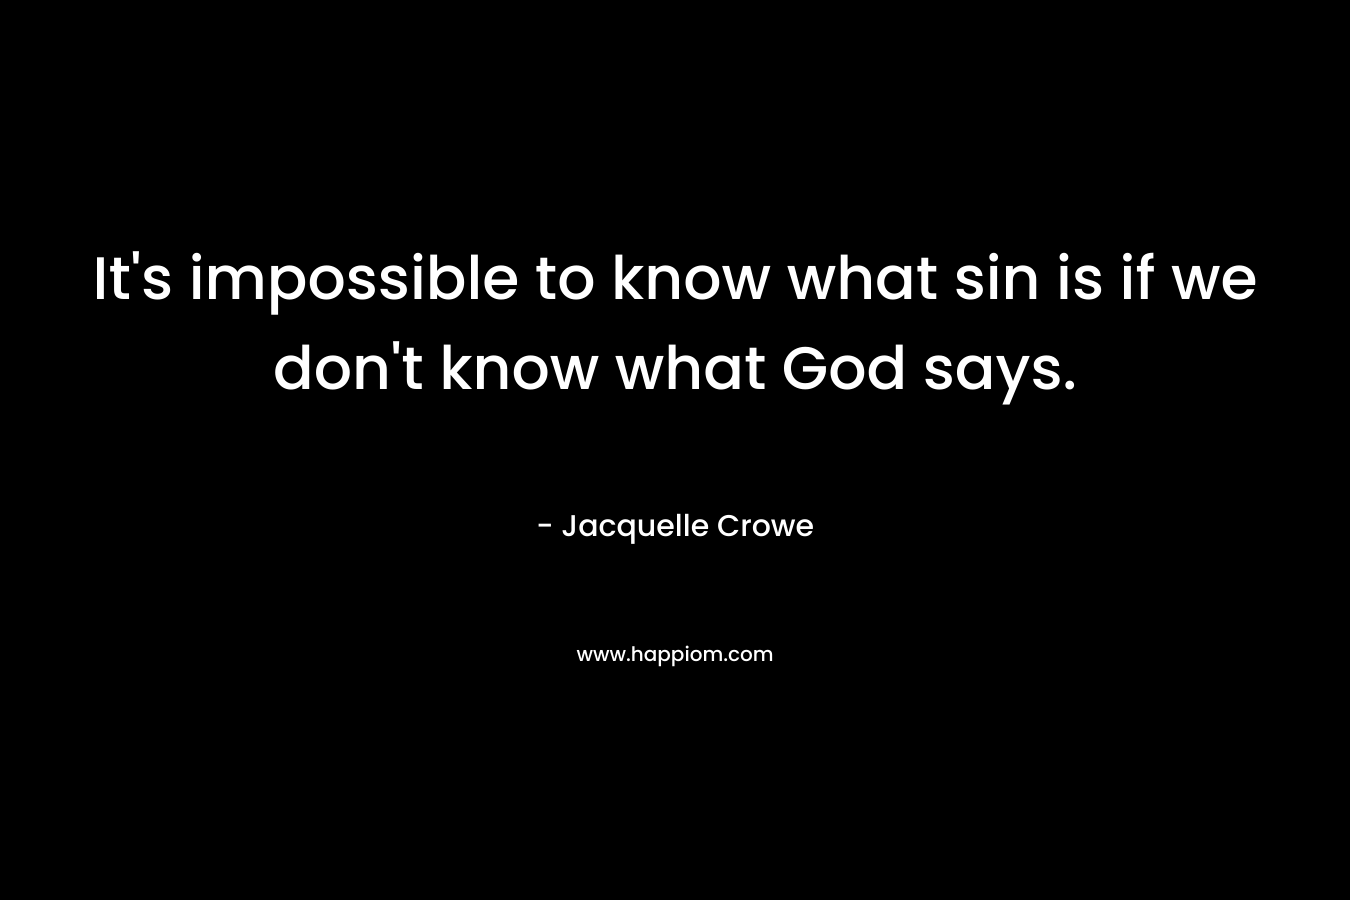 It’s impossible to know what sin is if we don’t know what God says. – Jacquelle Crowe